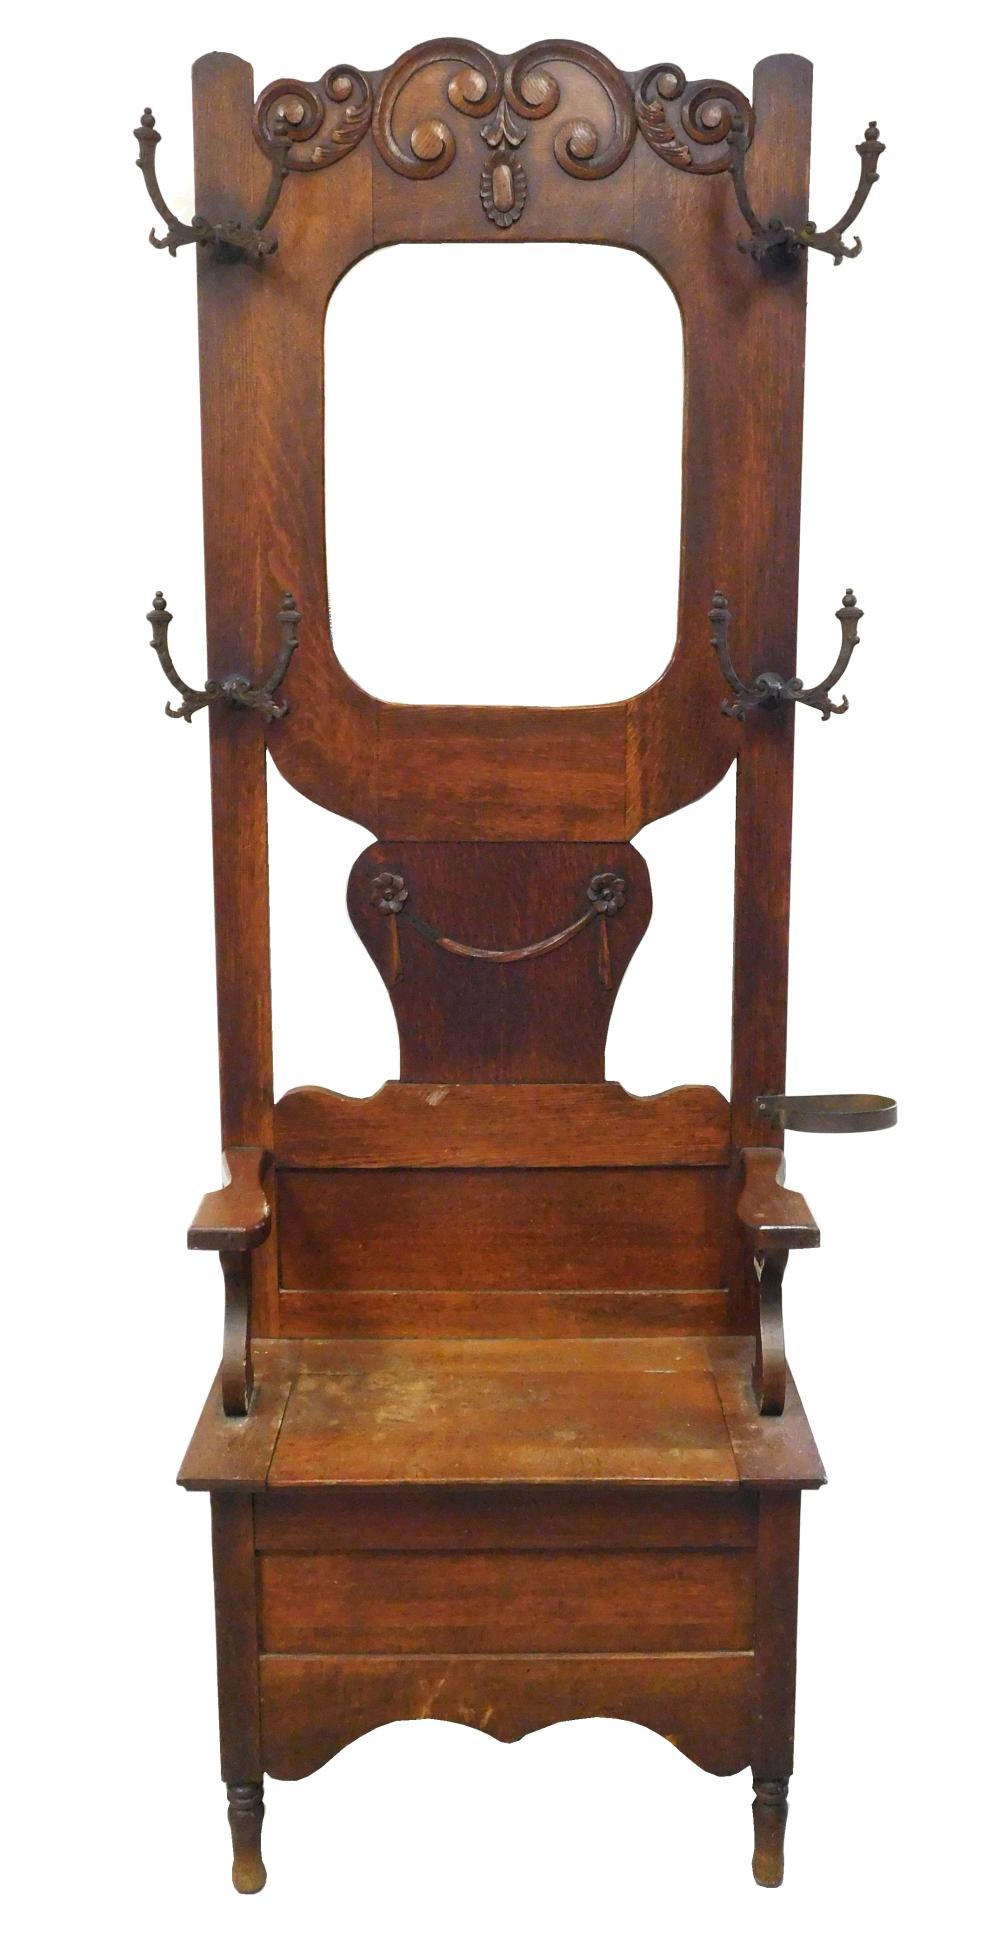 VICTORIAN HALL RACK WITH LIFT SEAT  31d33e